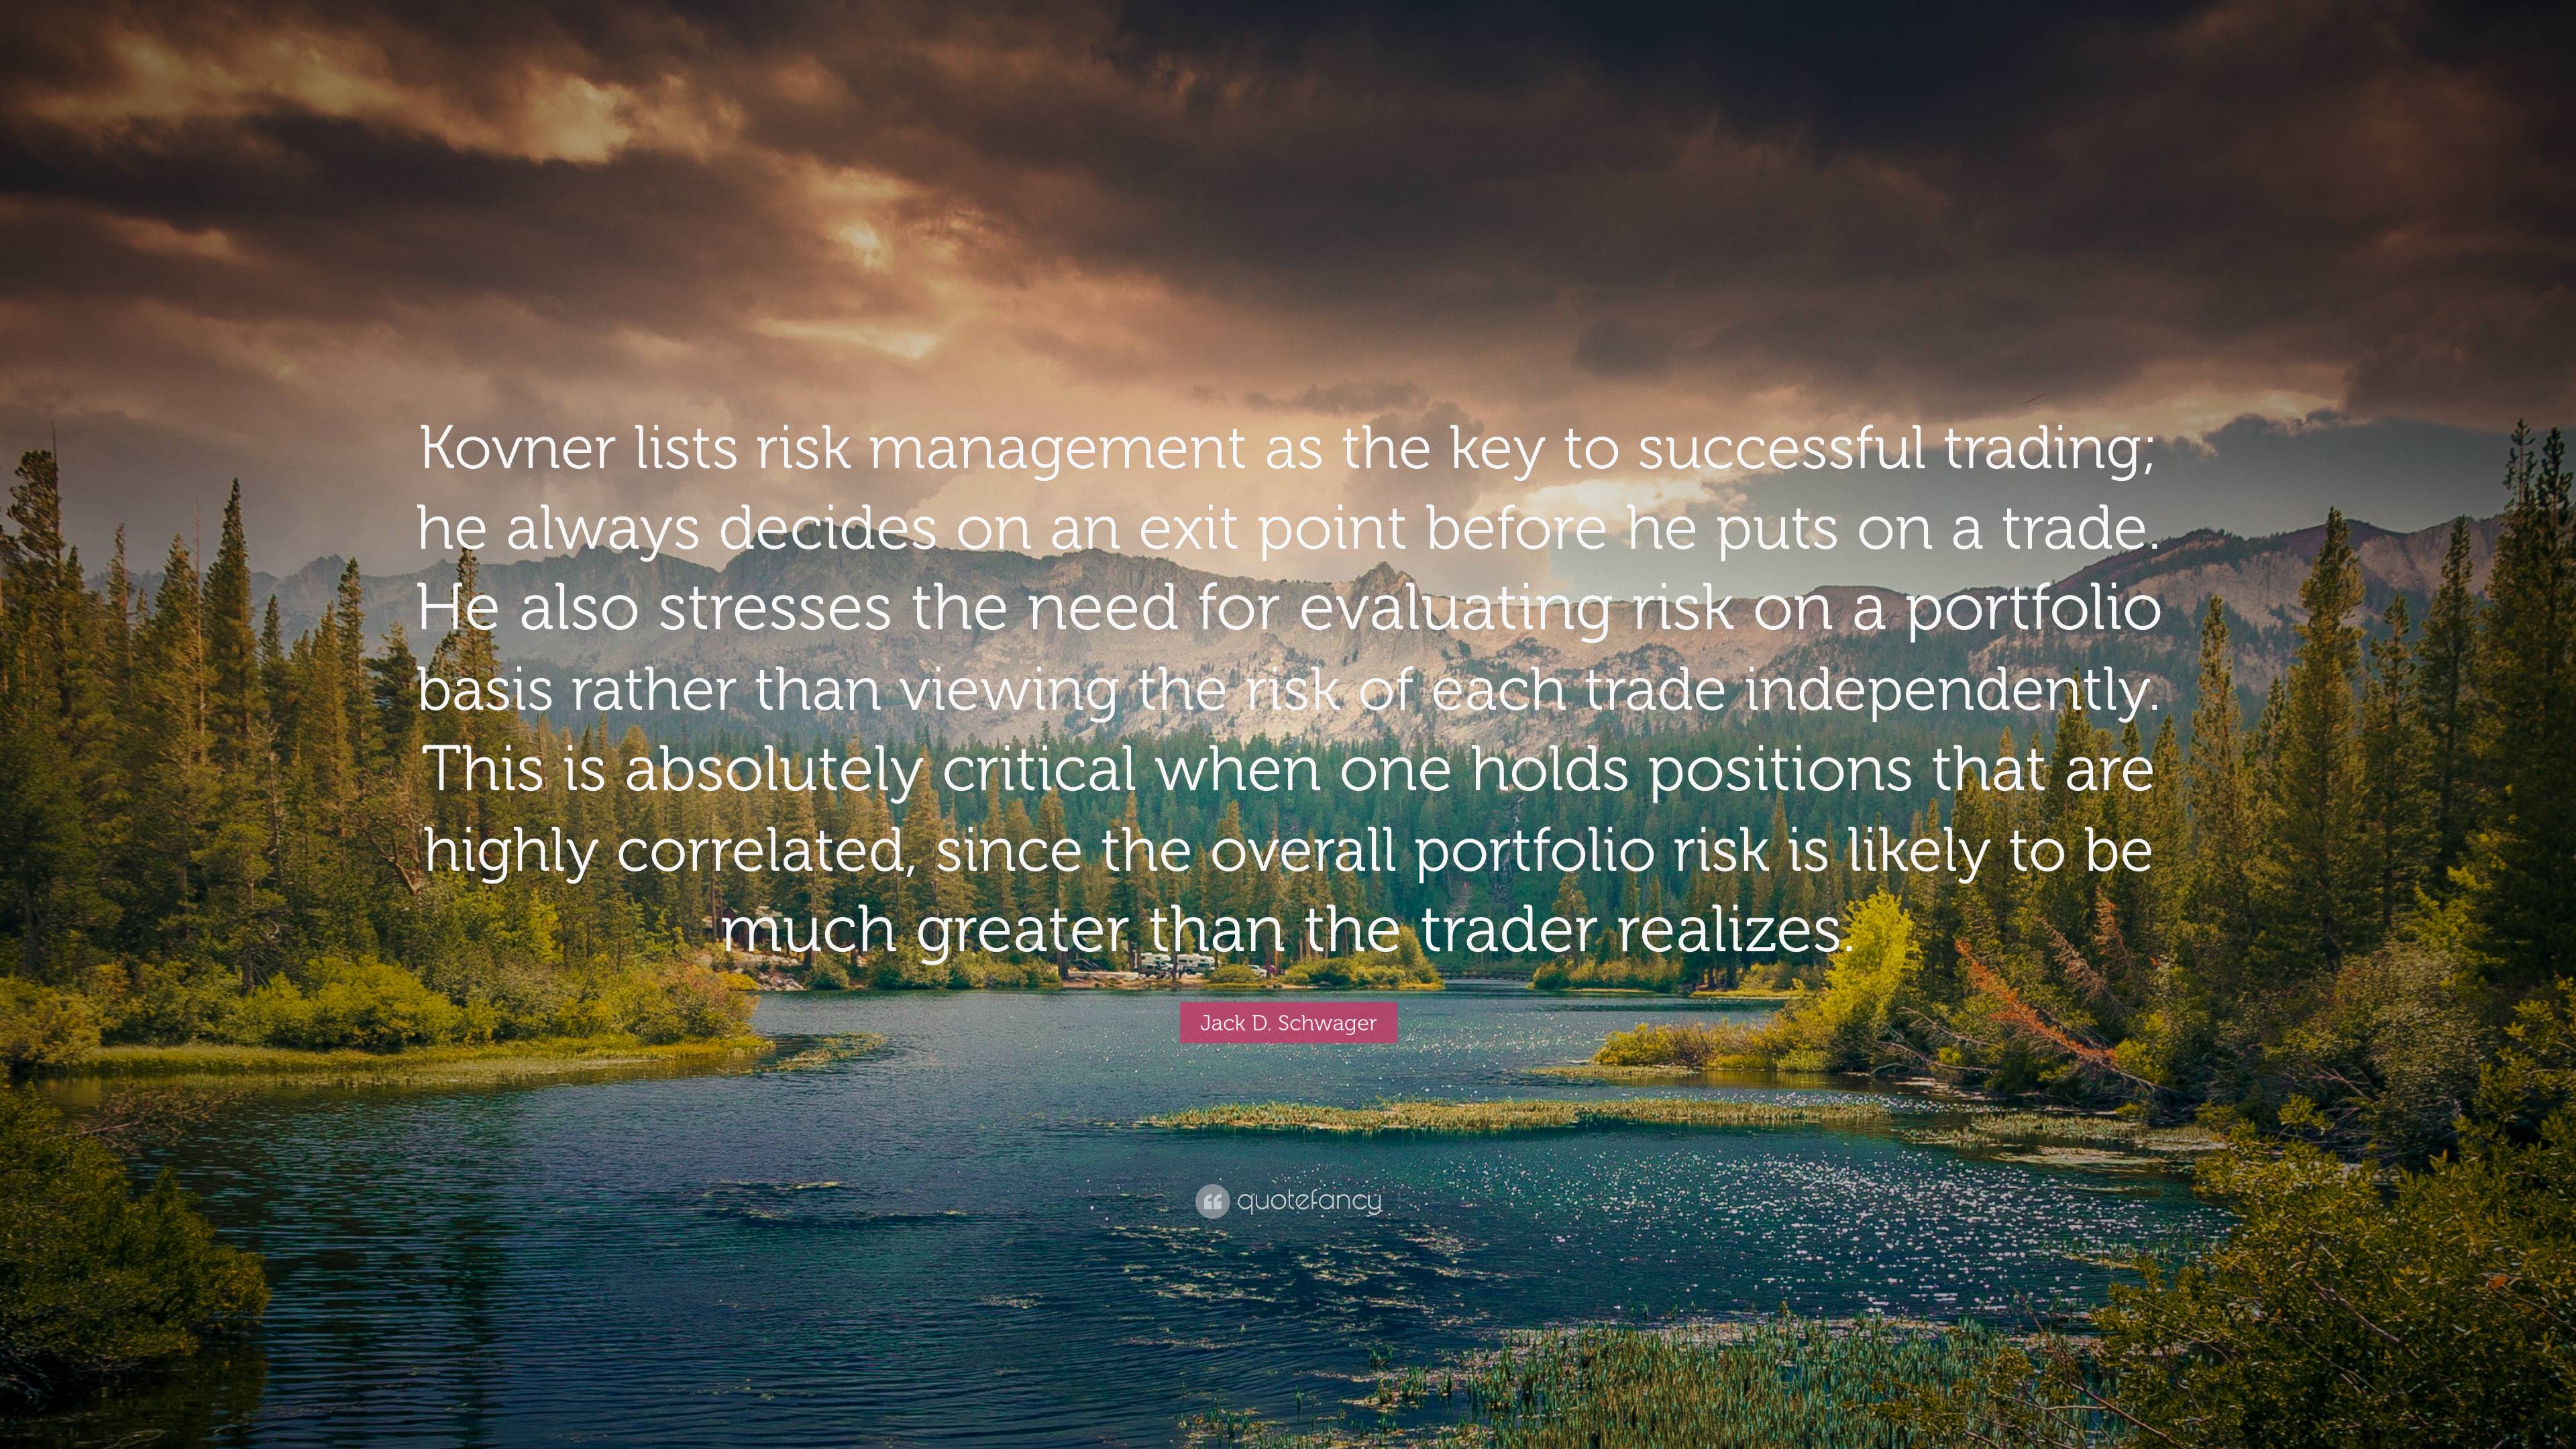 Jack D. Schwager Quote: “Kovner lists risk management as the key to ...